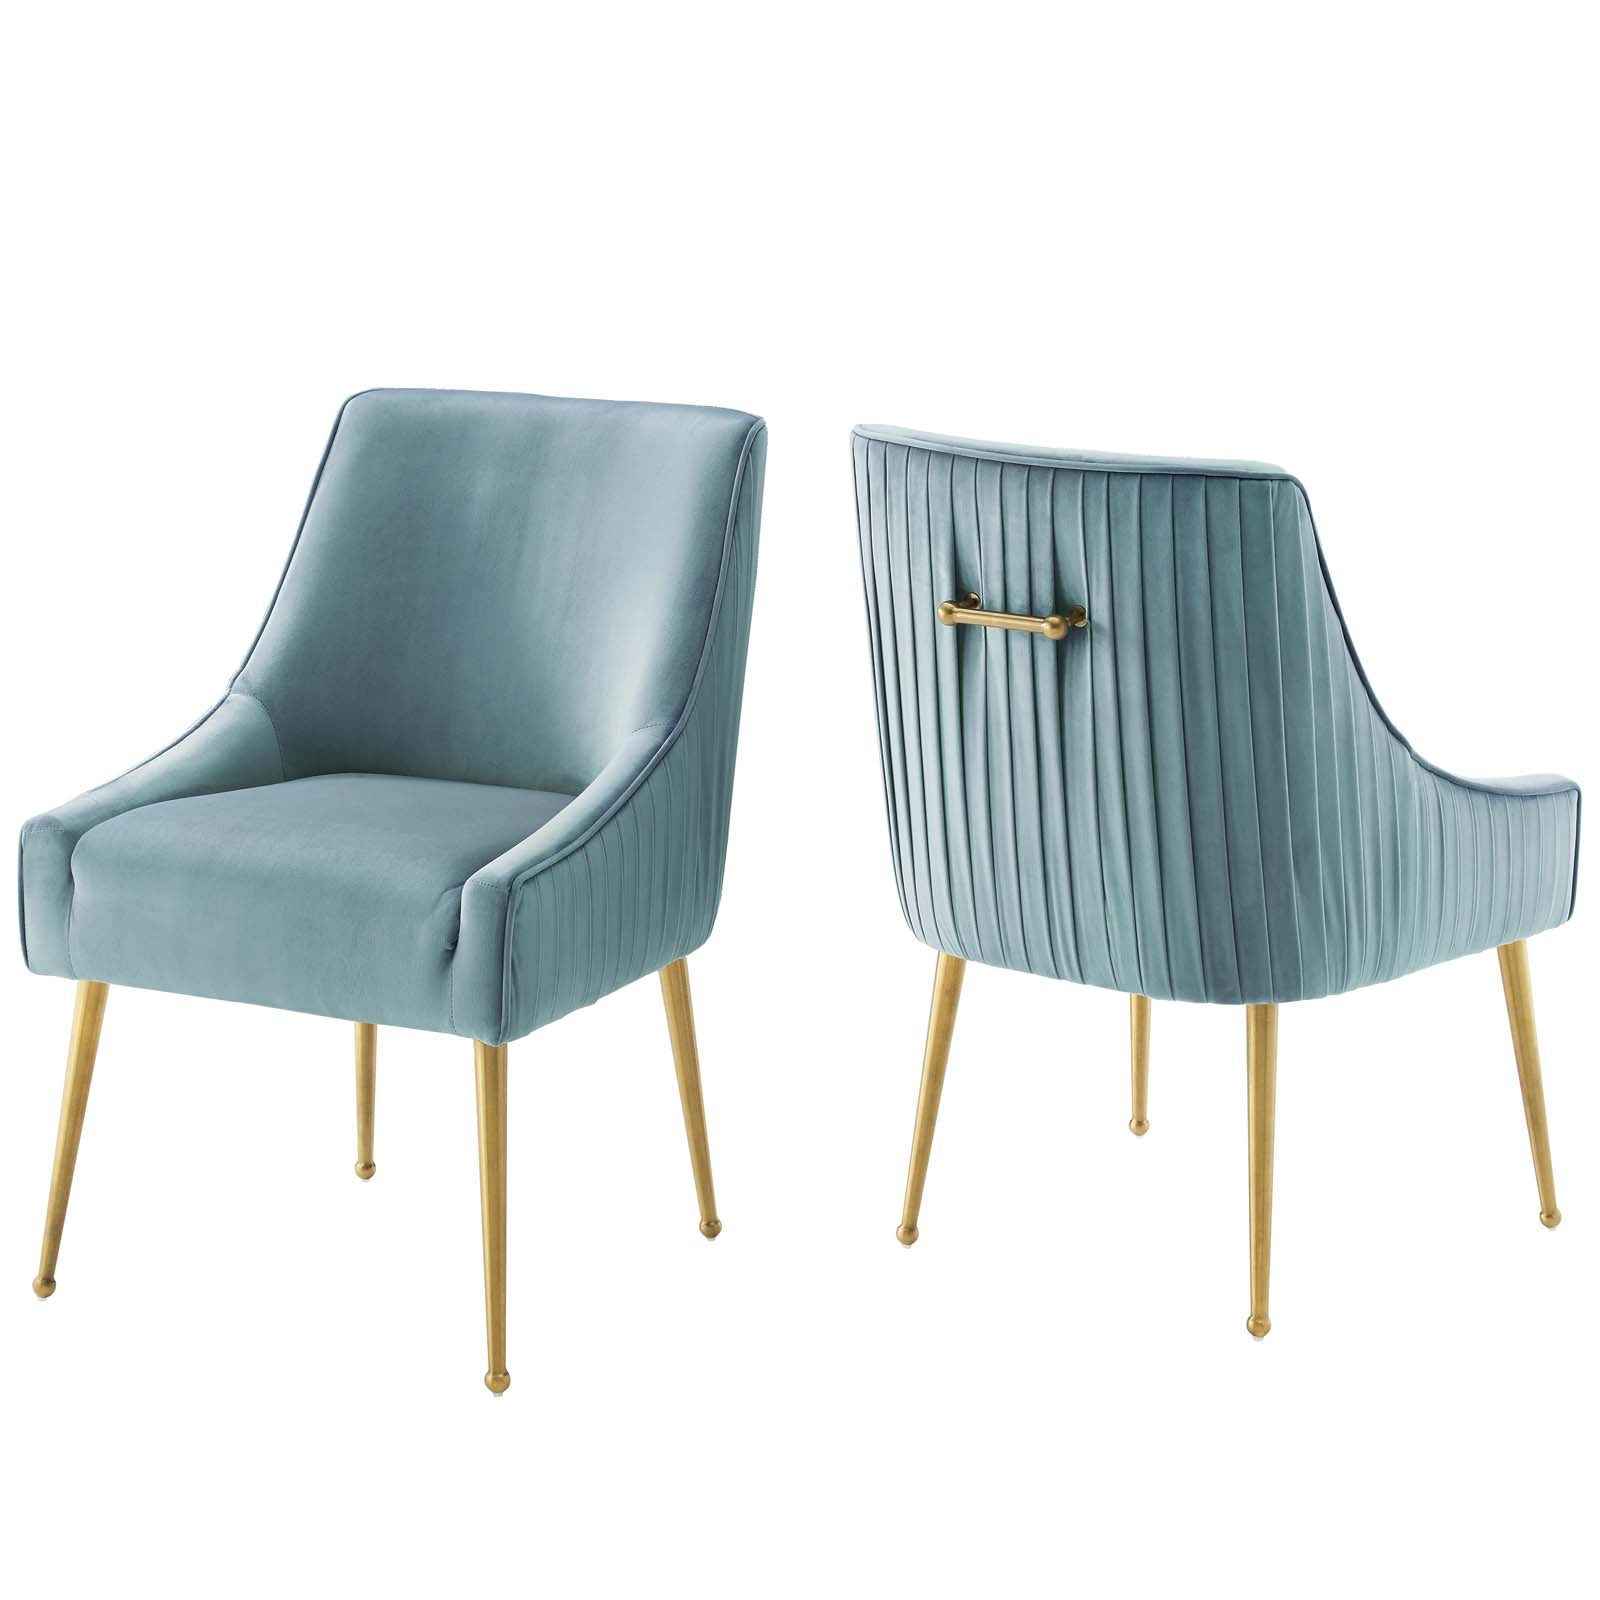 Modway Dining Chairs - Discern Pleated Back Upholstered Performance Velvet Dining Chair Set of 2 Light Blue